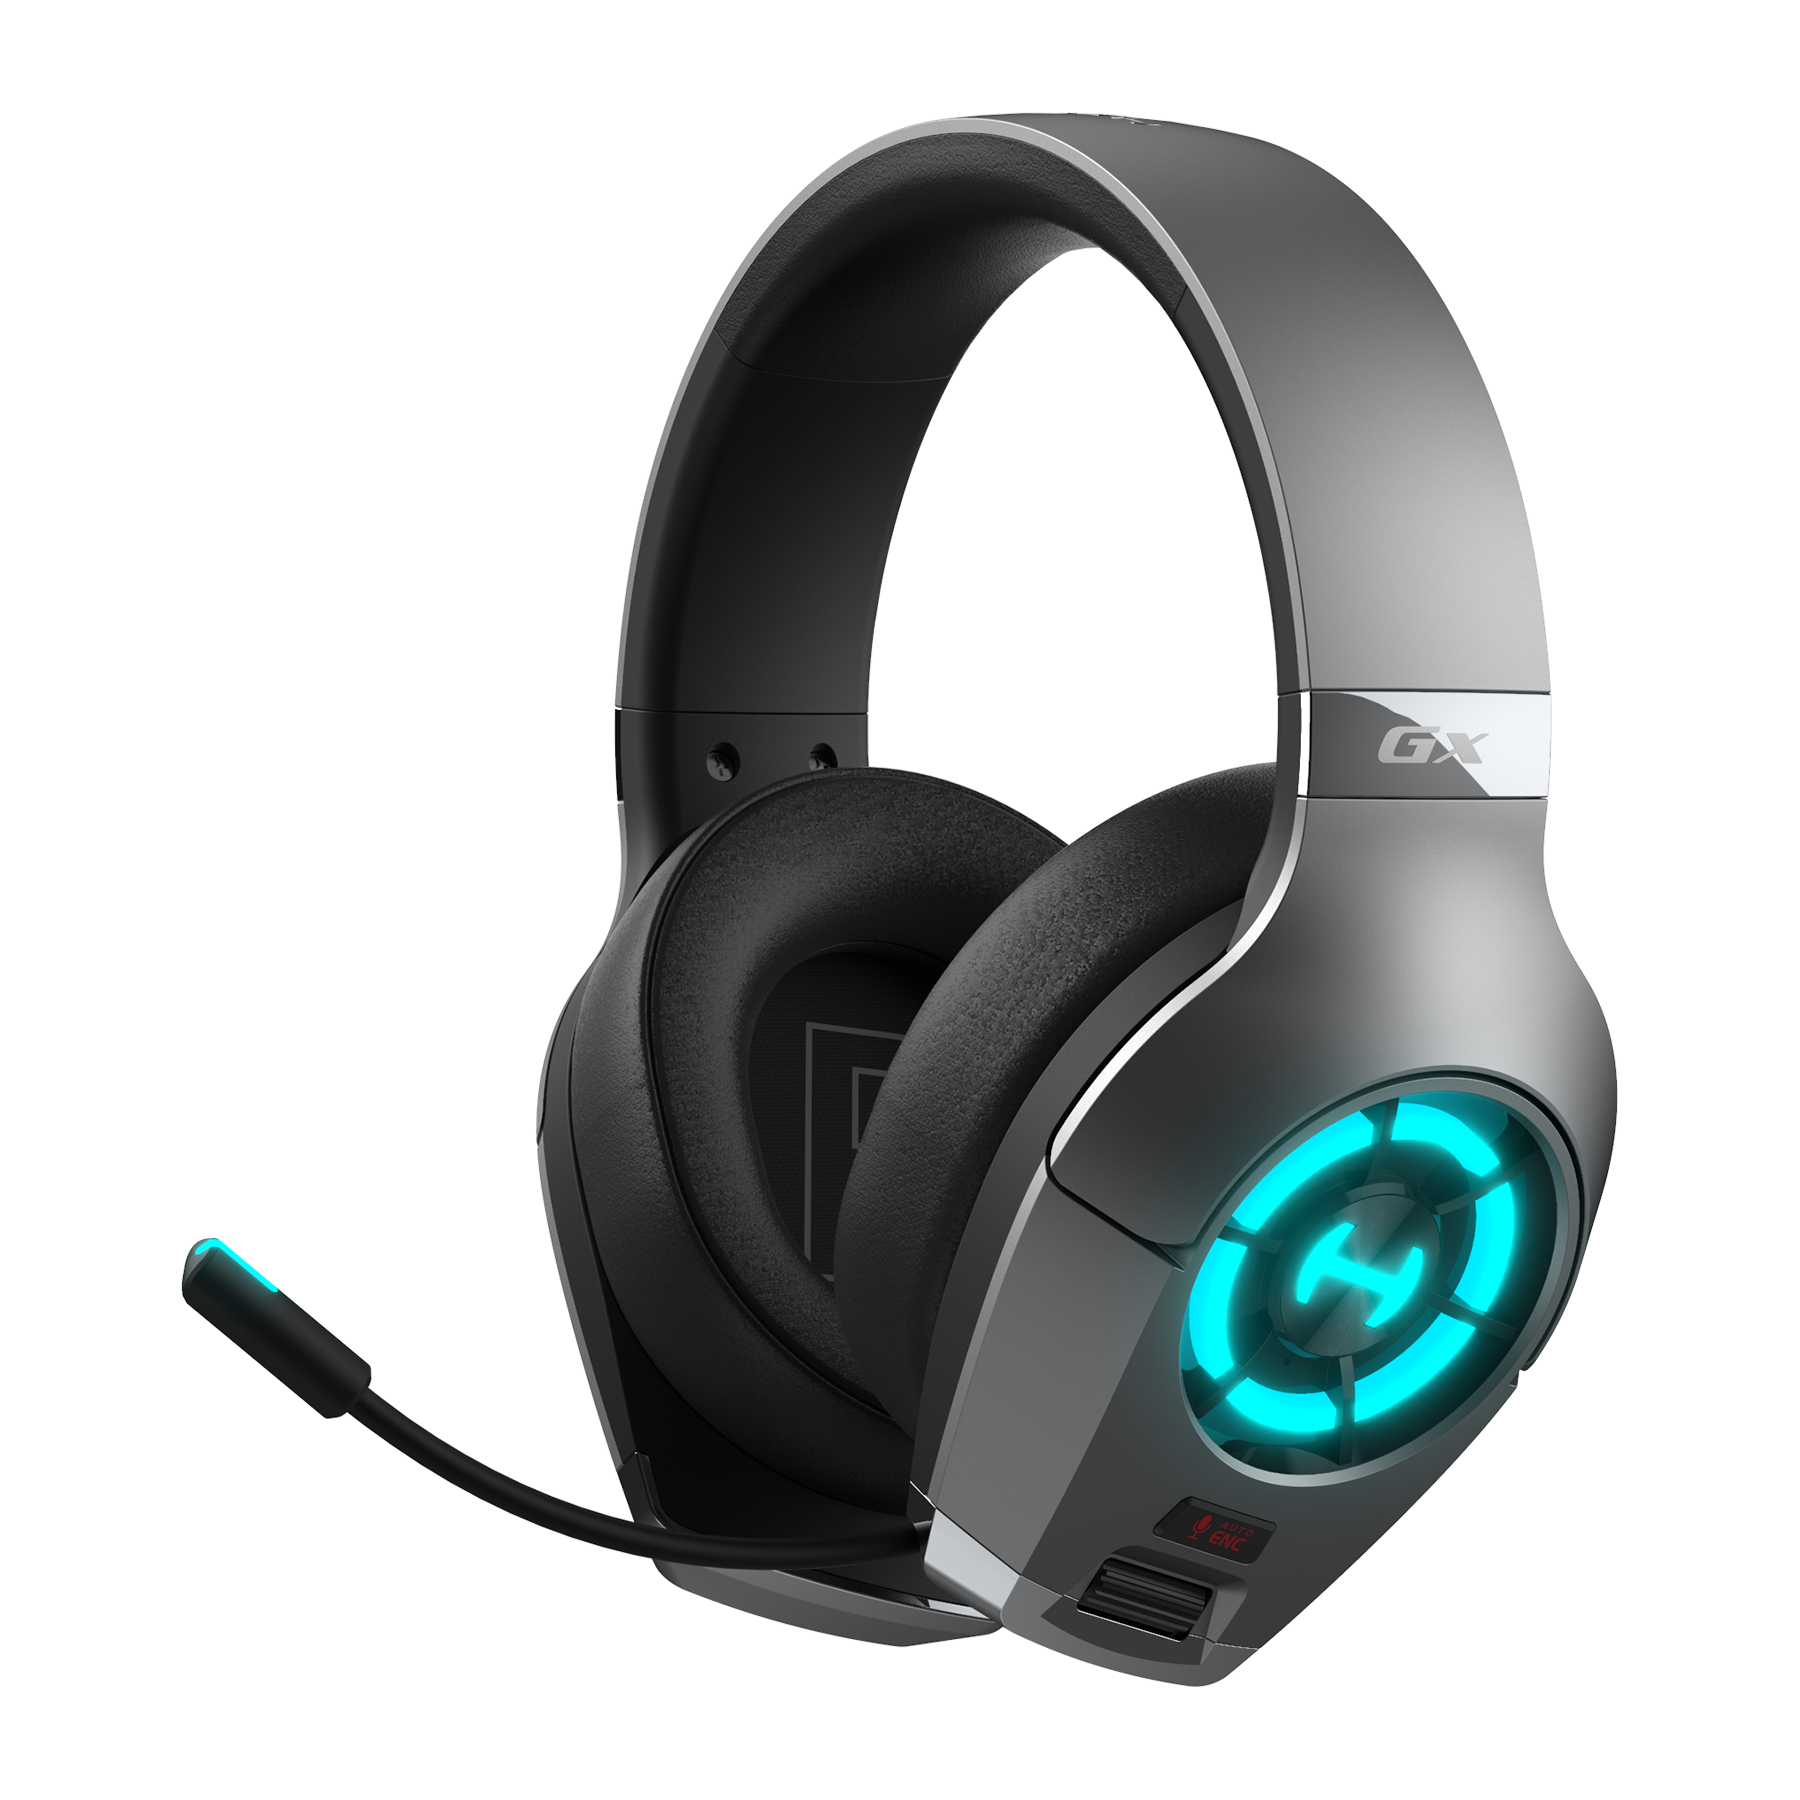 Gx Gaming Headset Product collection